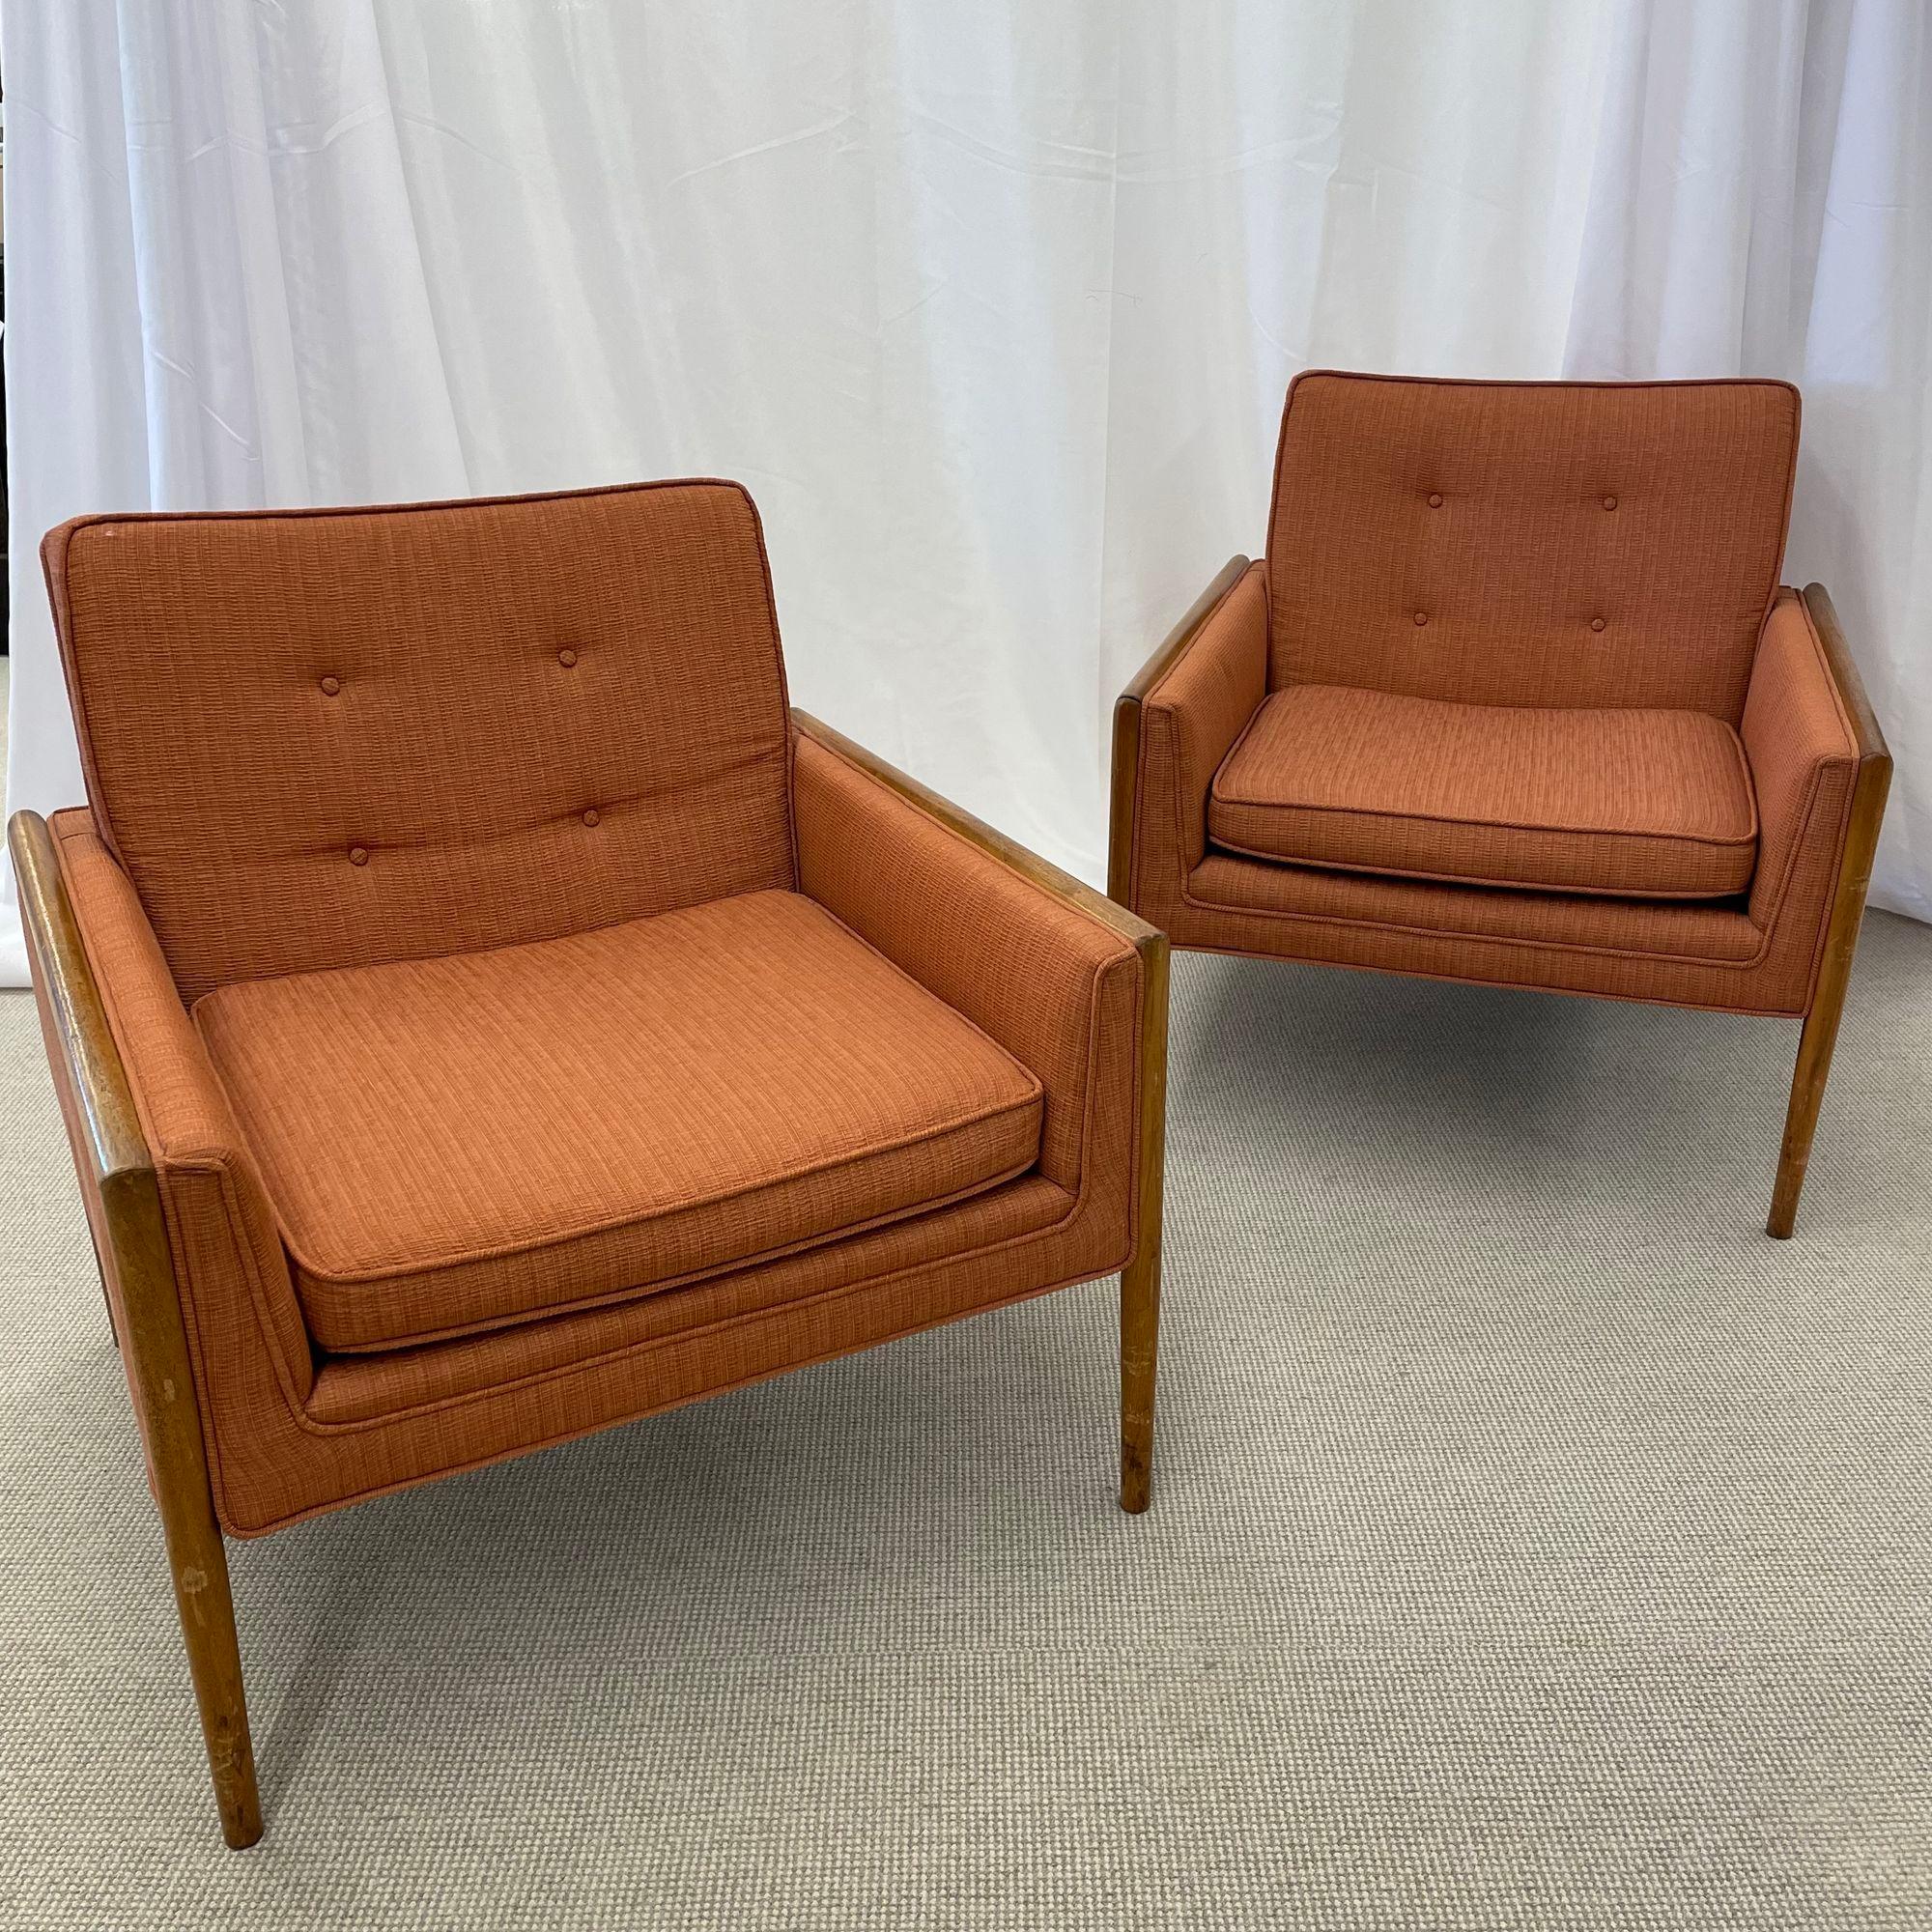 Pair of Mid-Century Modern lounge chairs.

These sleek and elegant arm or lounge chairs from the 1960s depict the Mid Century Modern era at its peak. Each having strong sturdy frames covered in their original tweed fabric. The box form sides, back